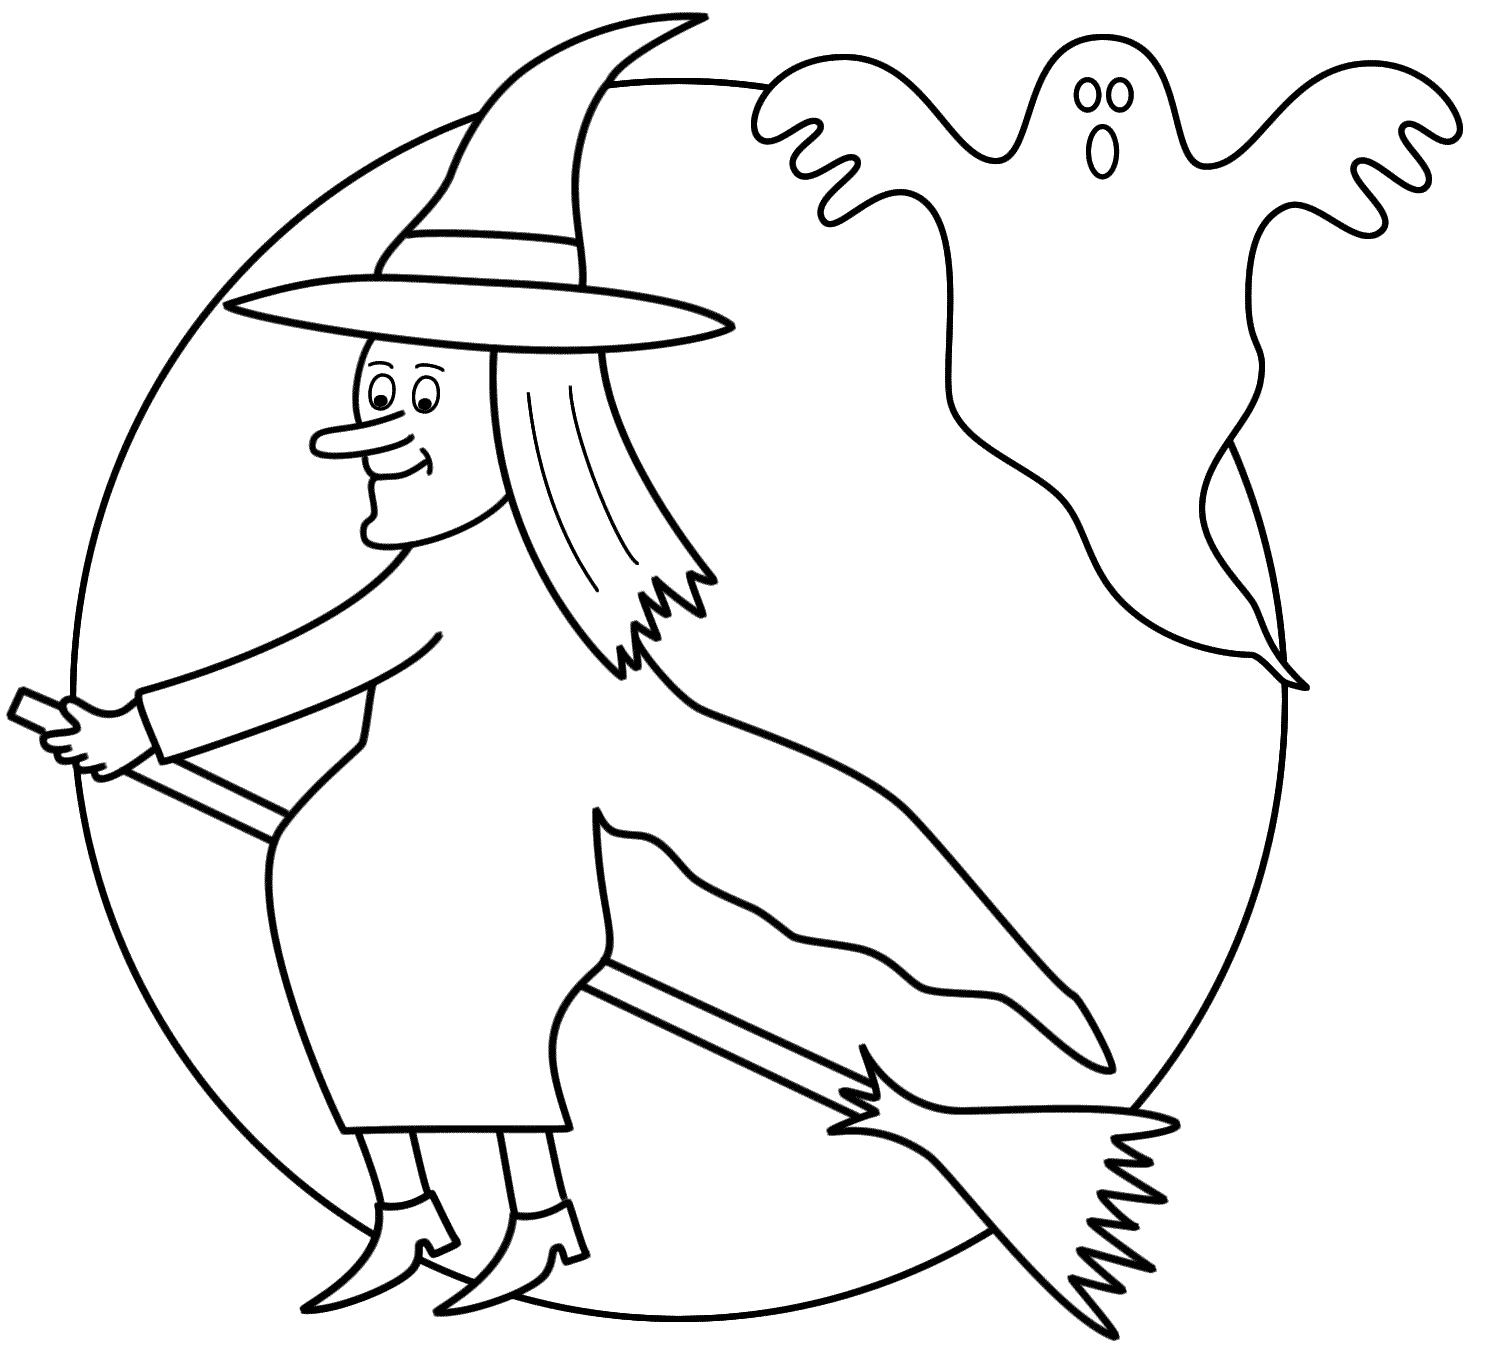 Witch on a broom with the moon and a ghost - Coloring Page (Halloween)